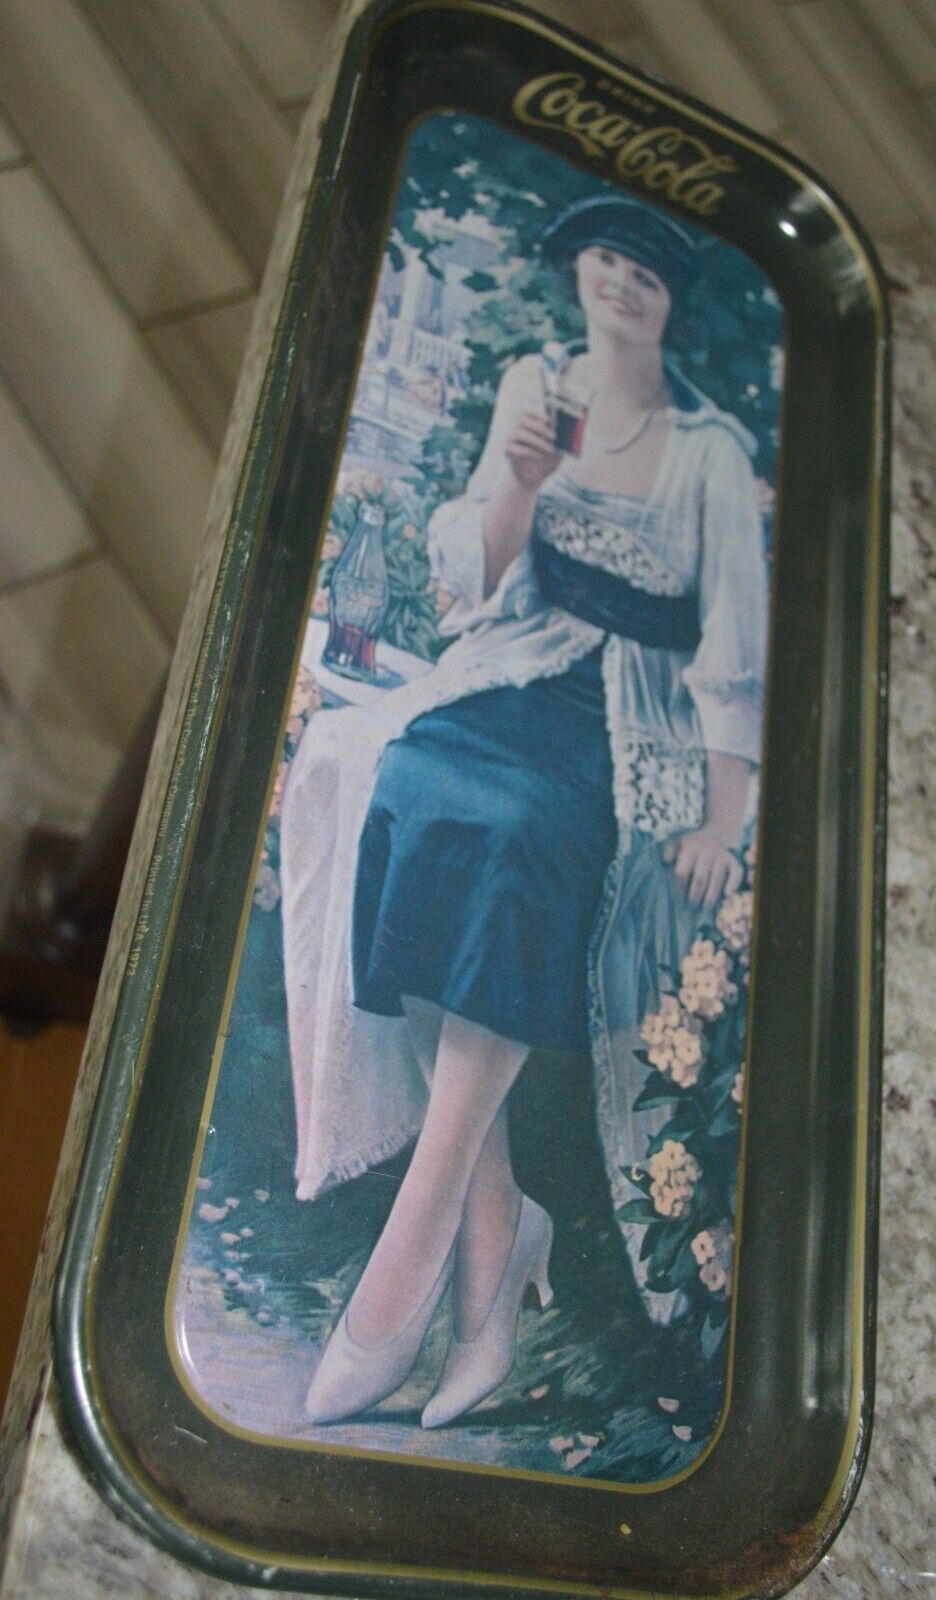 Primary image for Vintage Original 1973 Coca Cola Party Girl Flapper Serving Tray 1921 Advertised